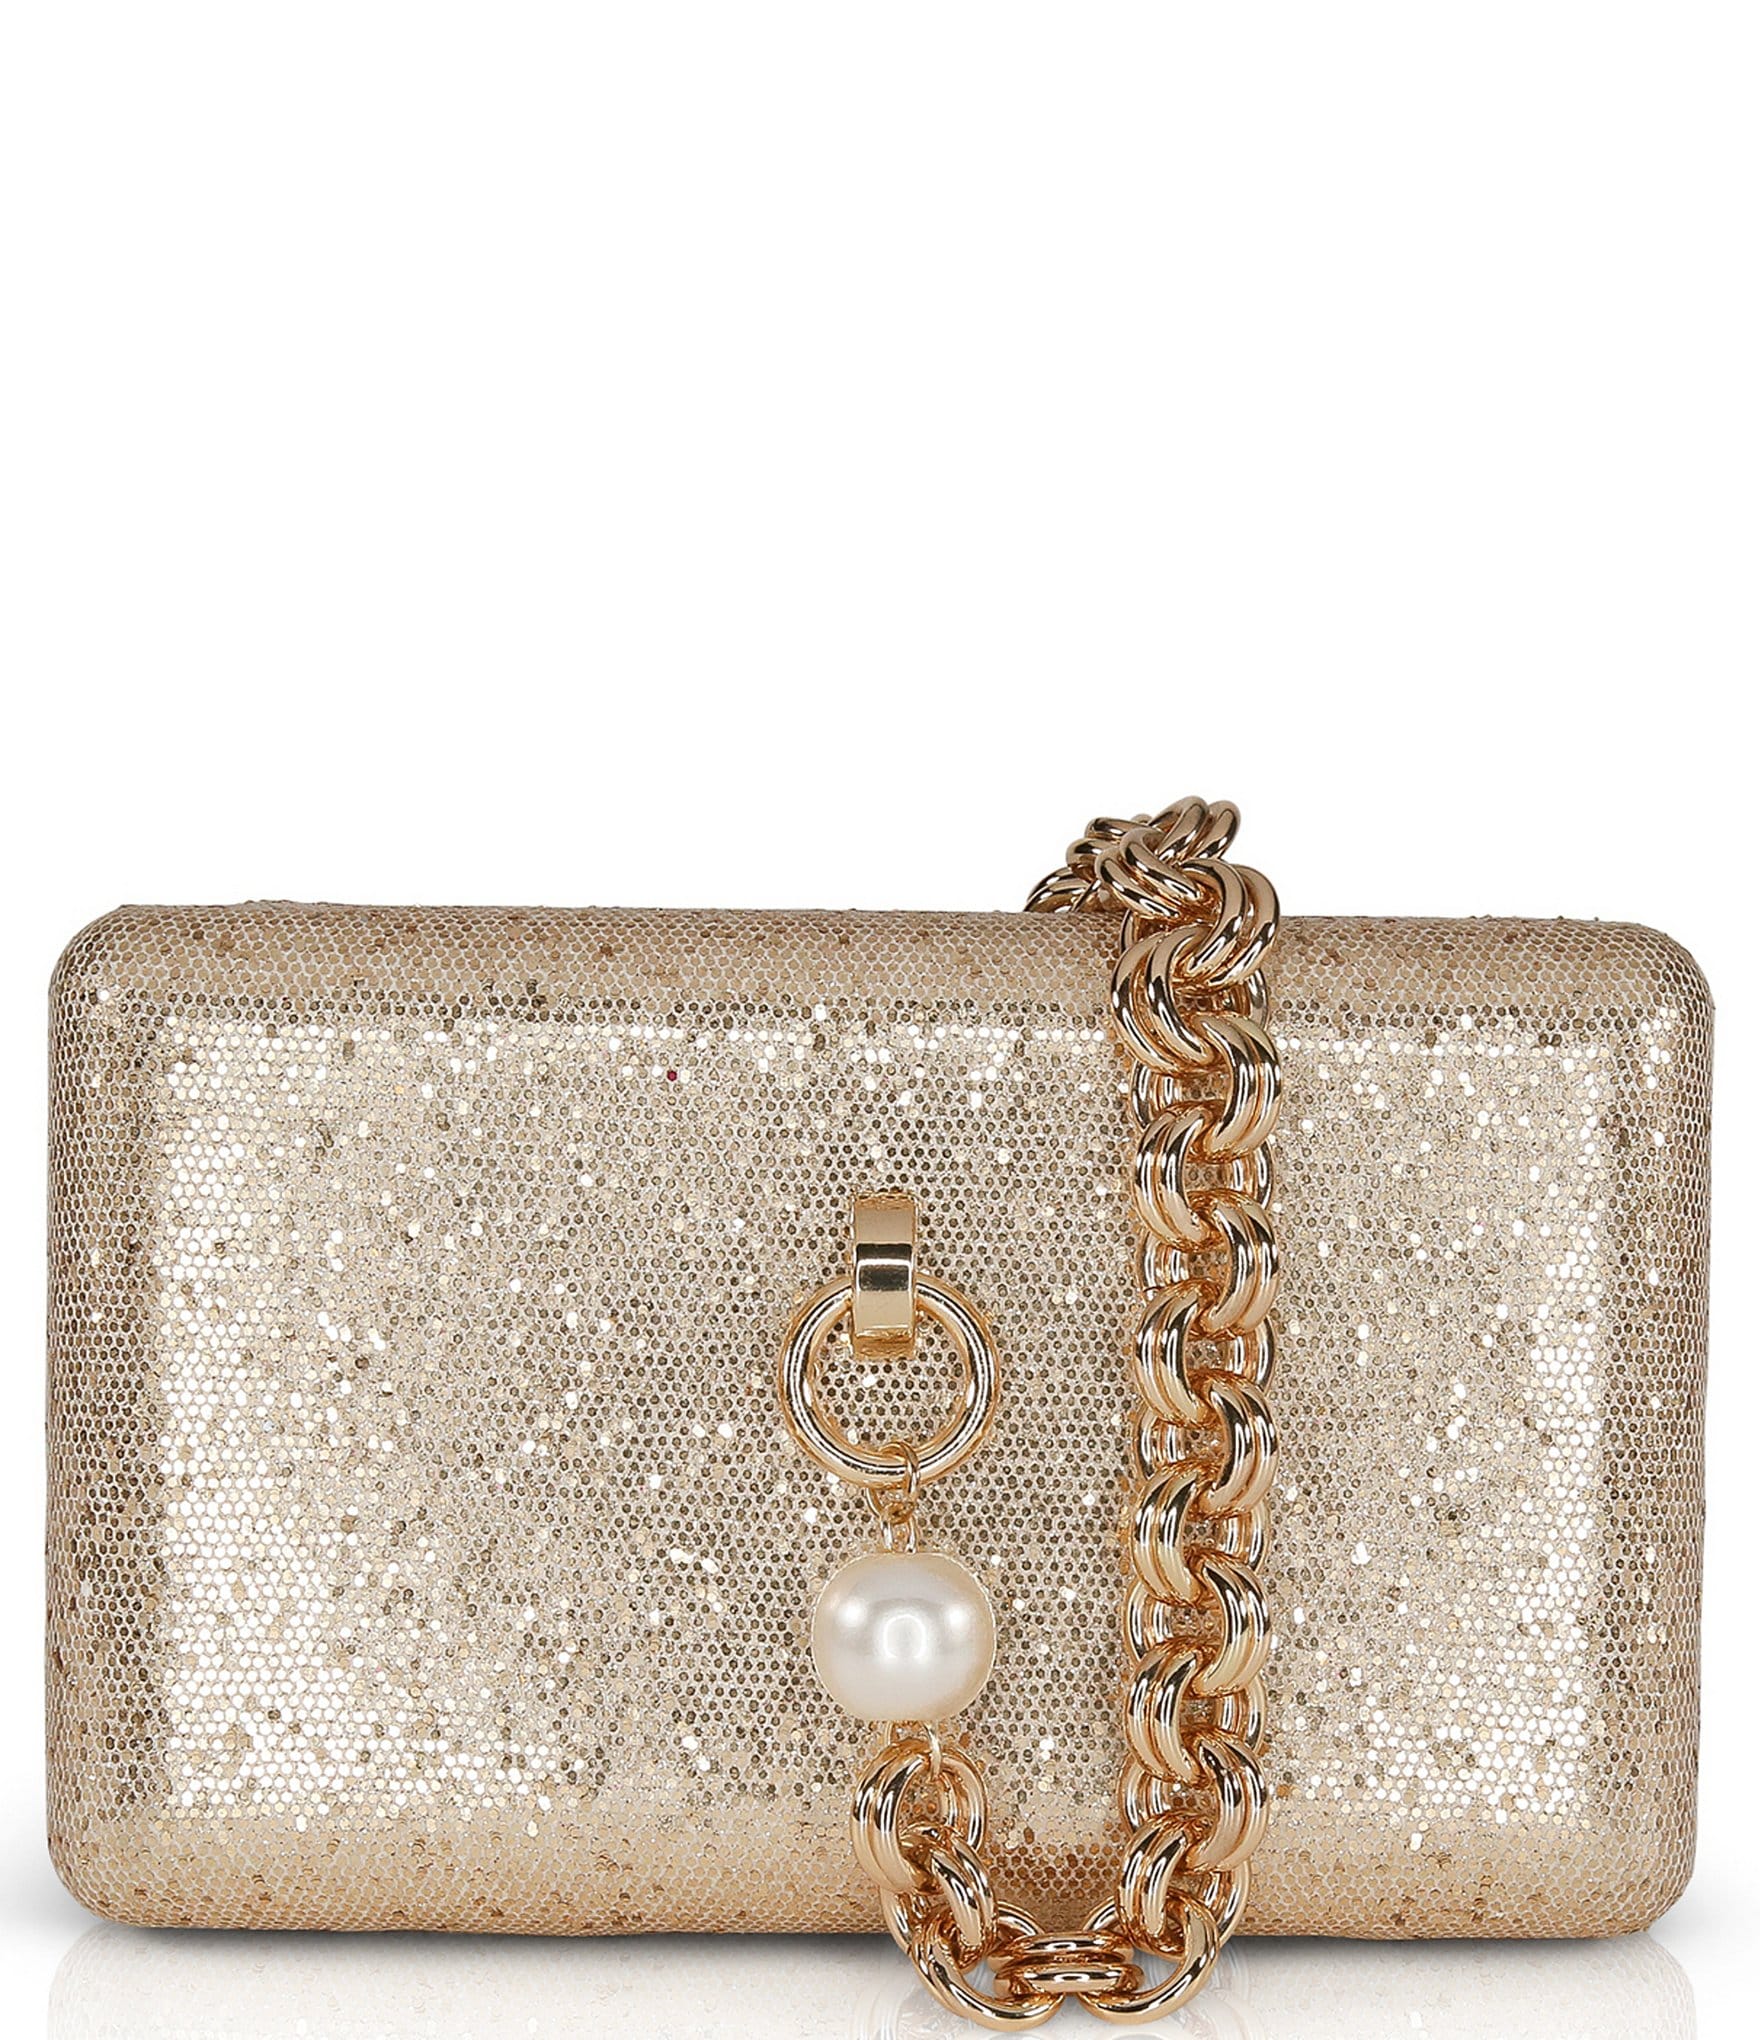 Ted Baker Gold Glitter Box Clutch Bag With Bow